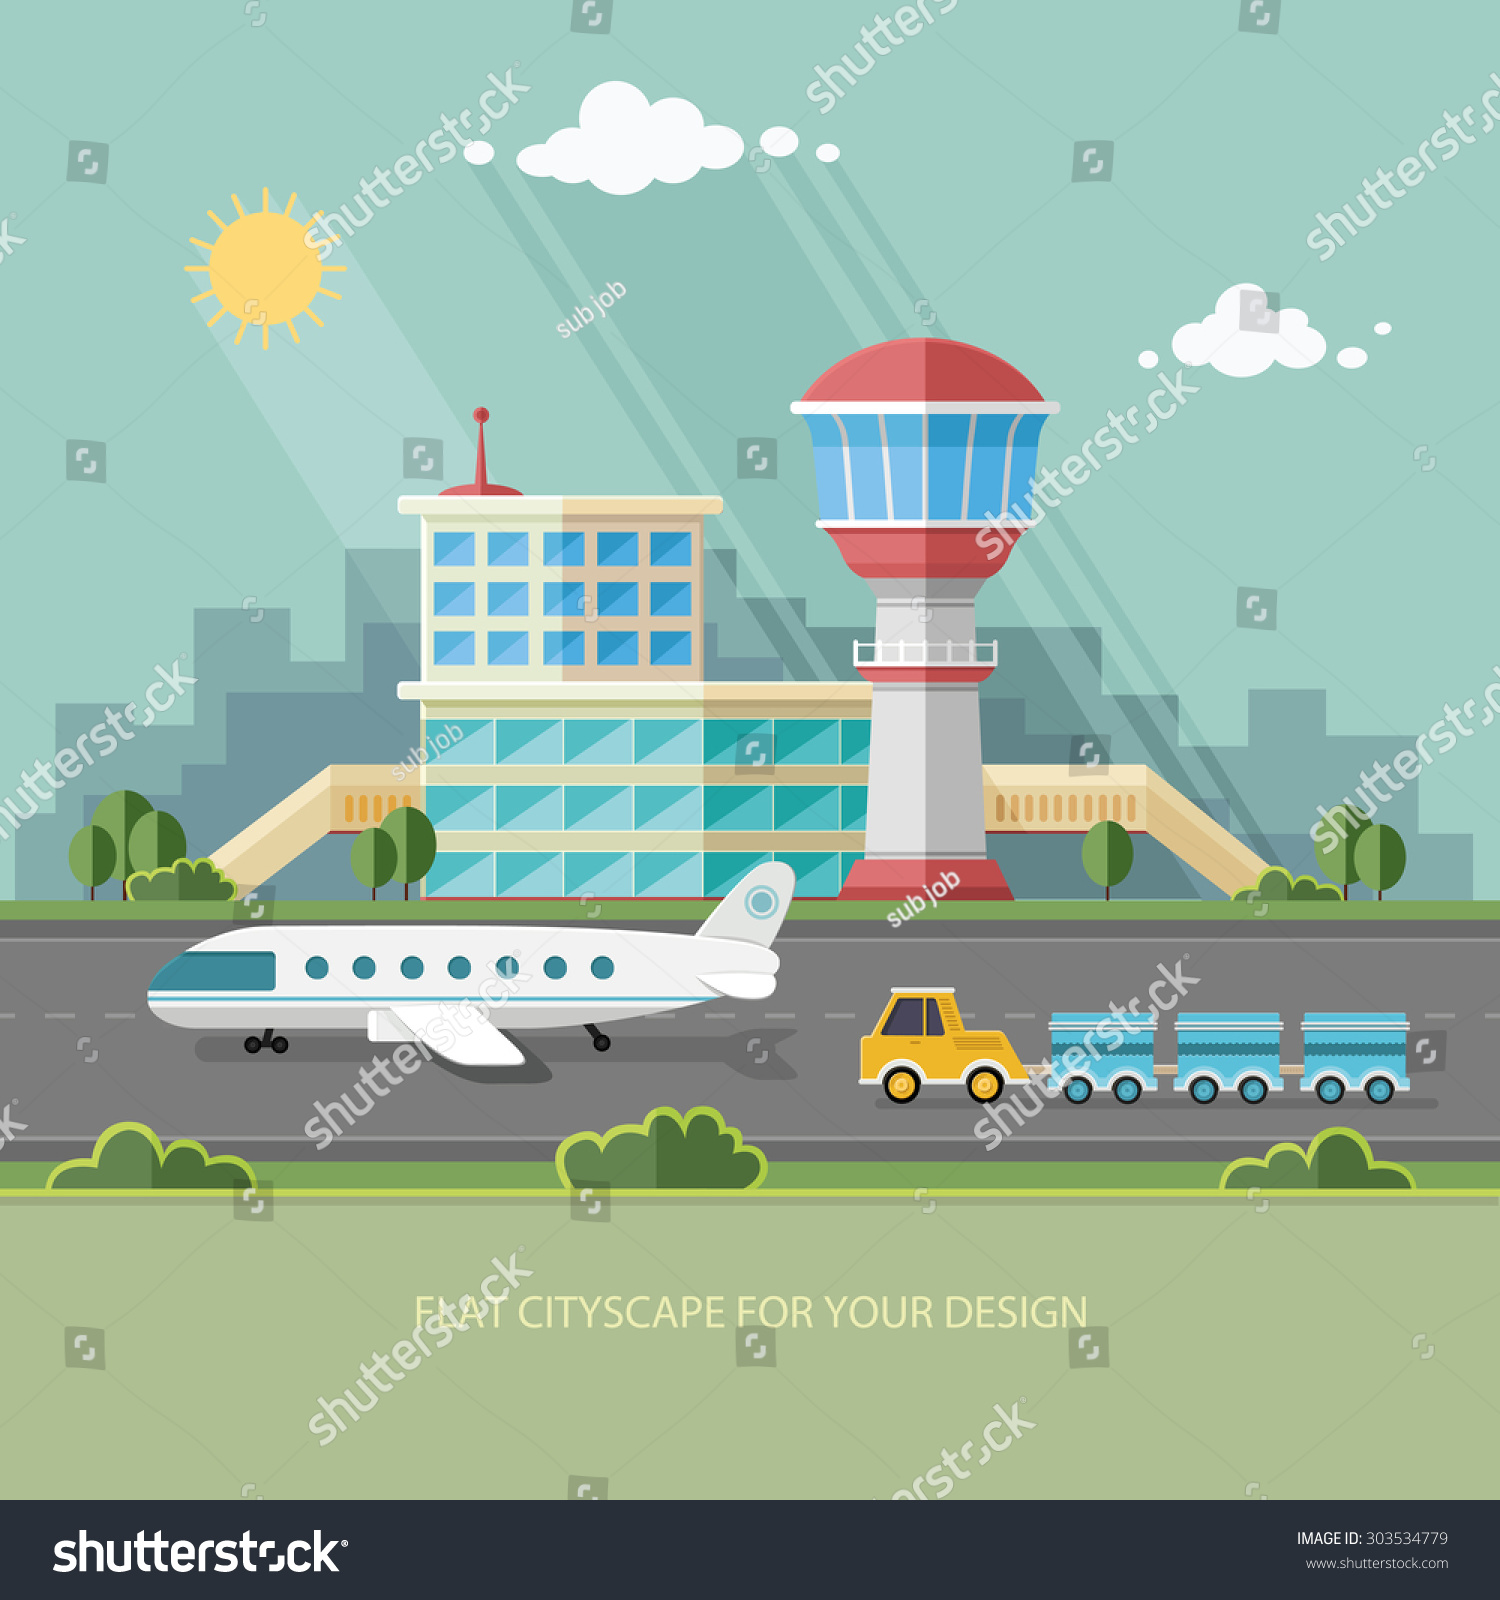 airport tower clipart - photo #45